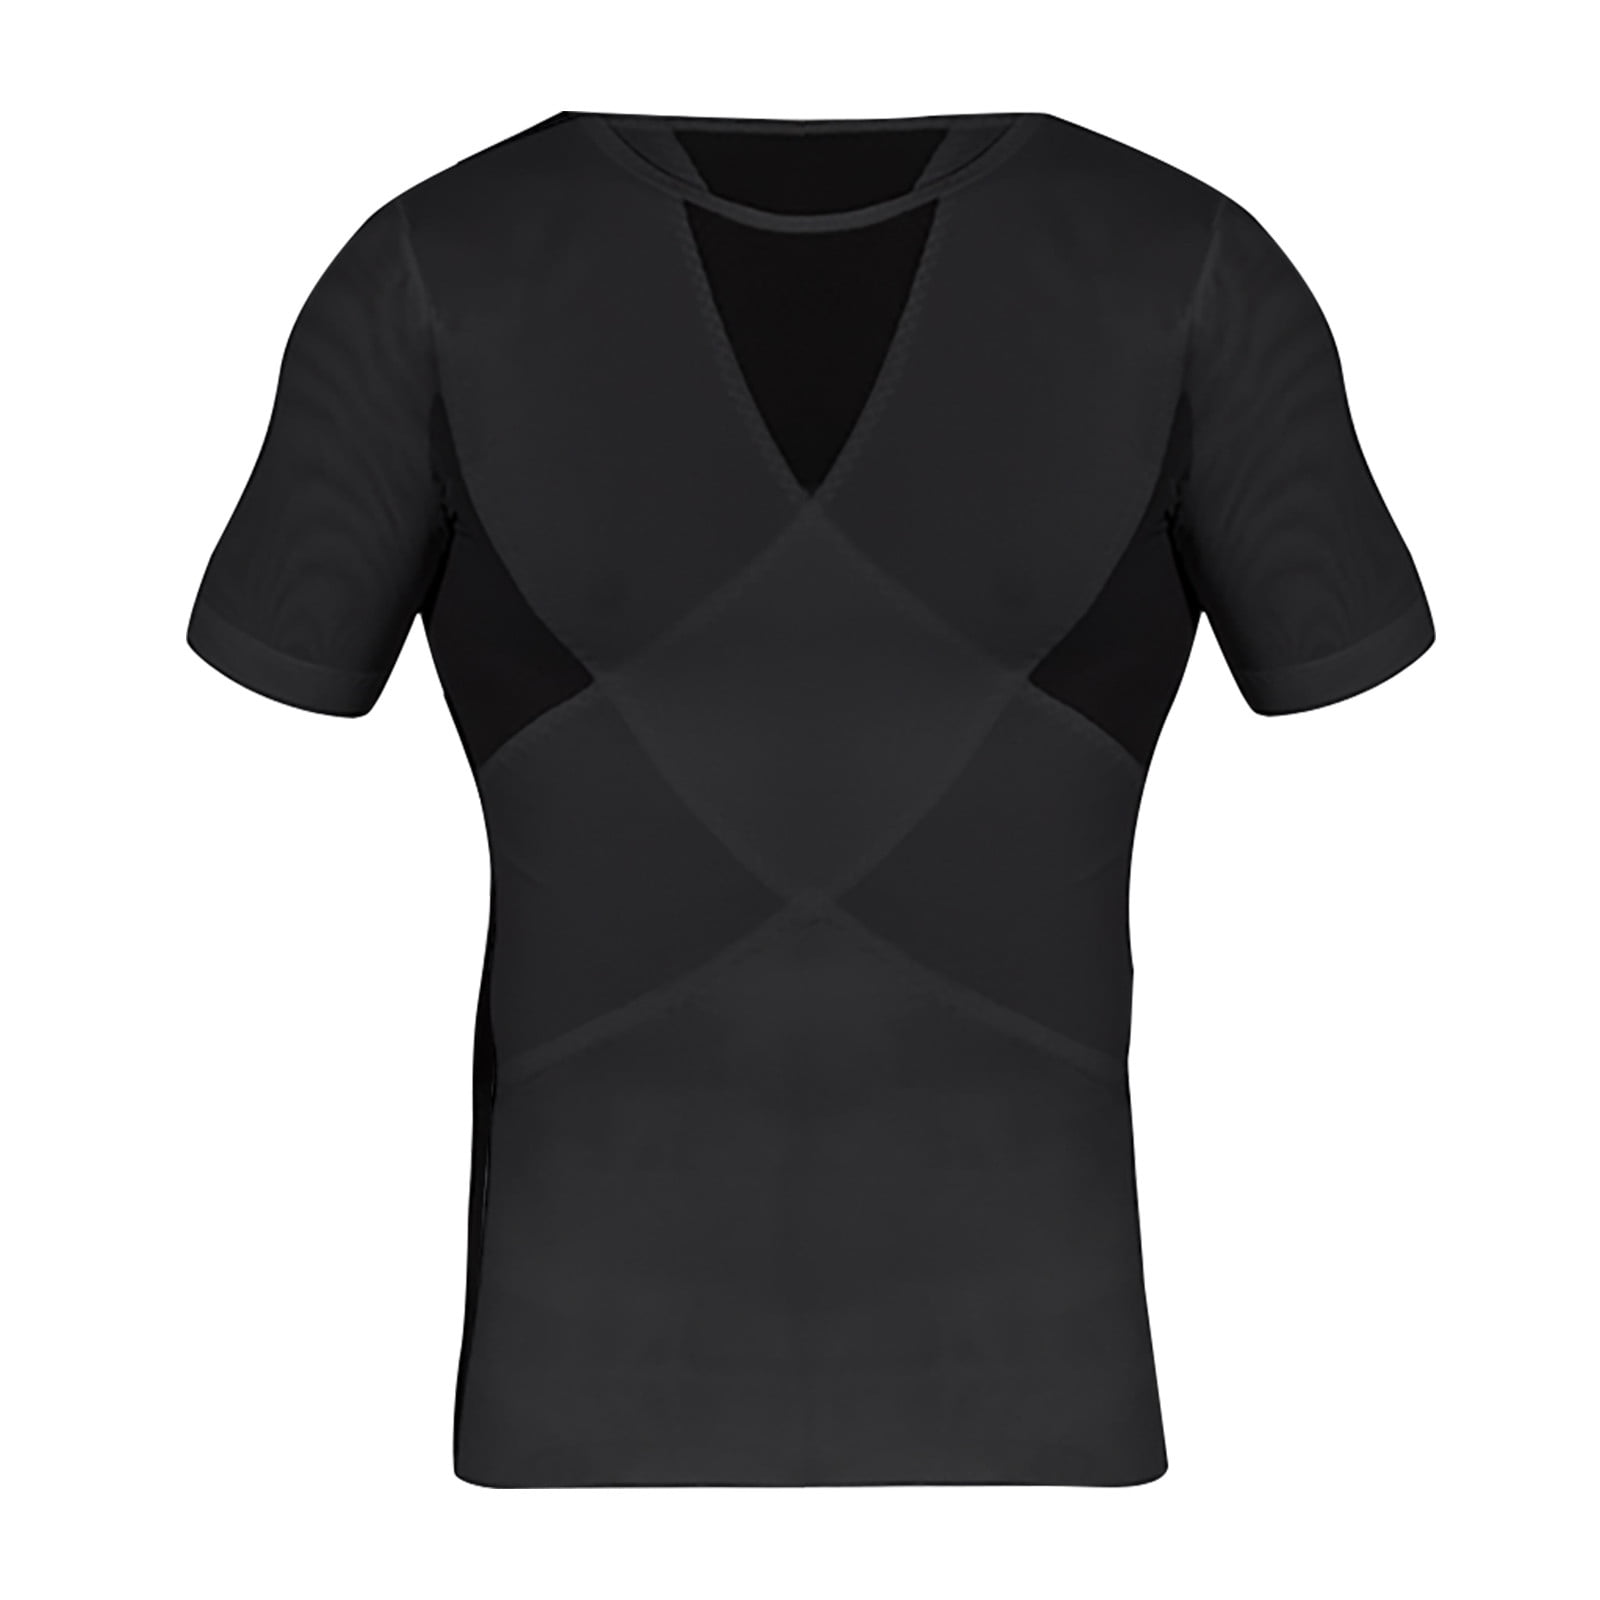 Cathalem Cotton Tshirts for Women Graphic Tee Shirts Valentine Day Gifts  for Her,Black XXXL